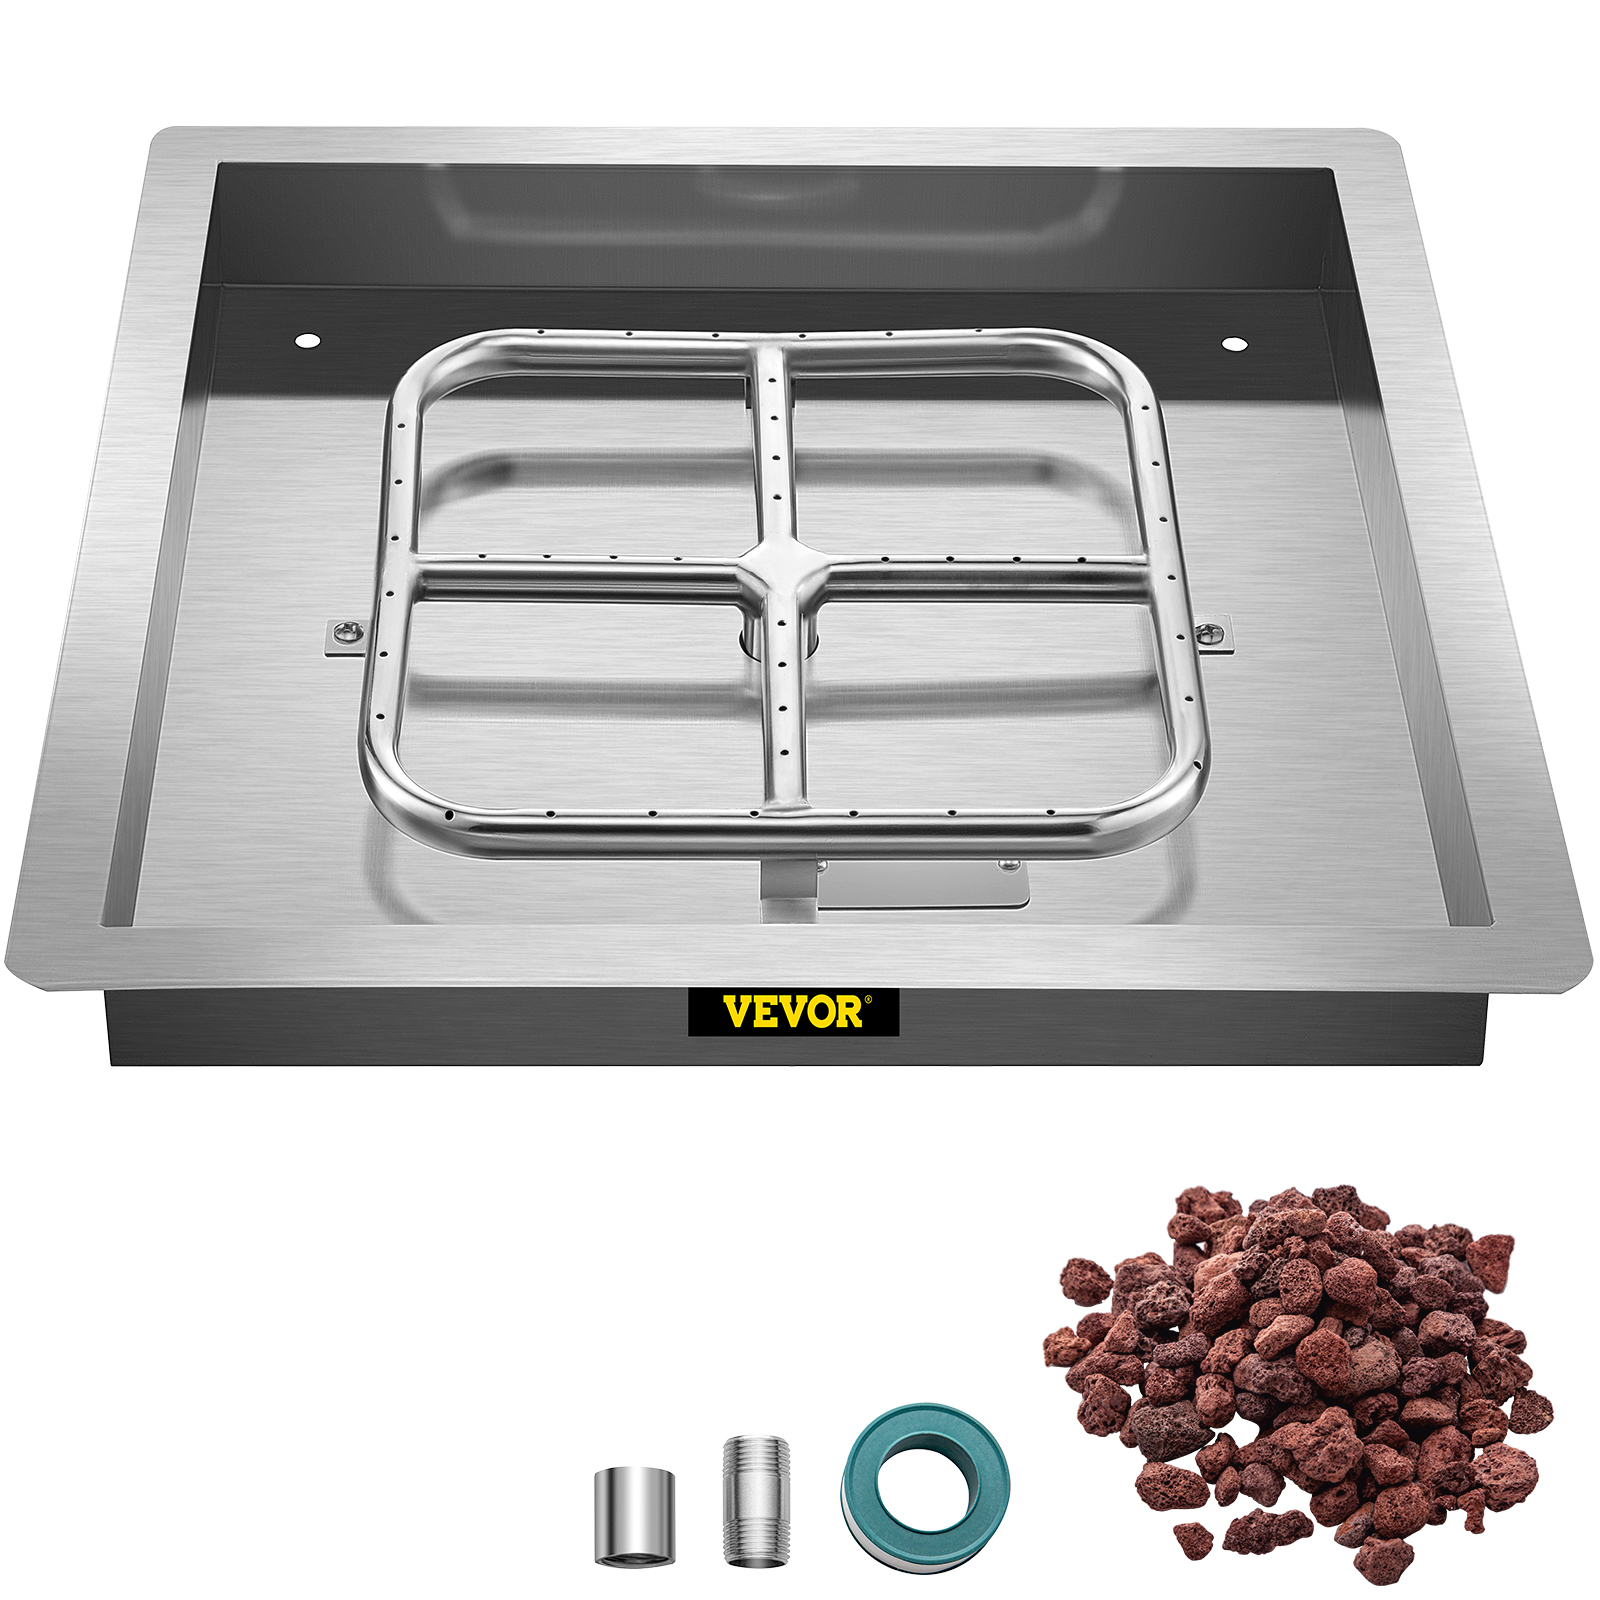 Vevor Drop In Fire Pit Pan Gas Fire Pan 36" X 36" Fire Pit Pan Stainless Steel от Vevor Many GEOs